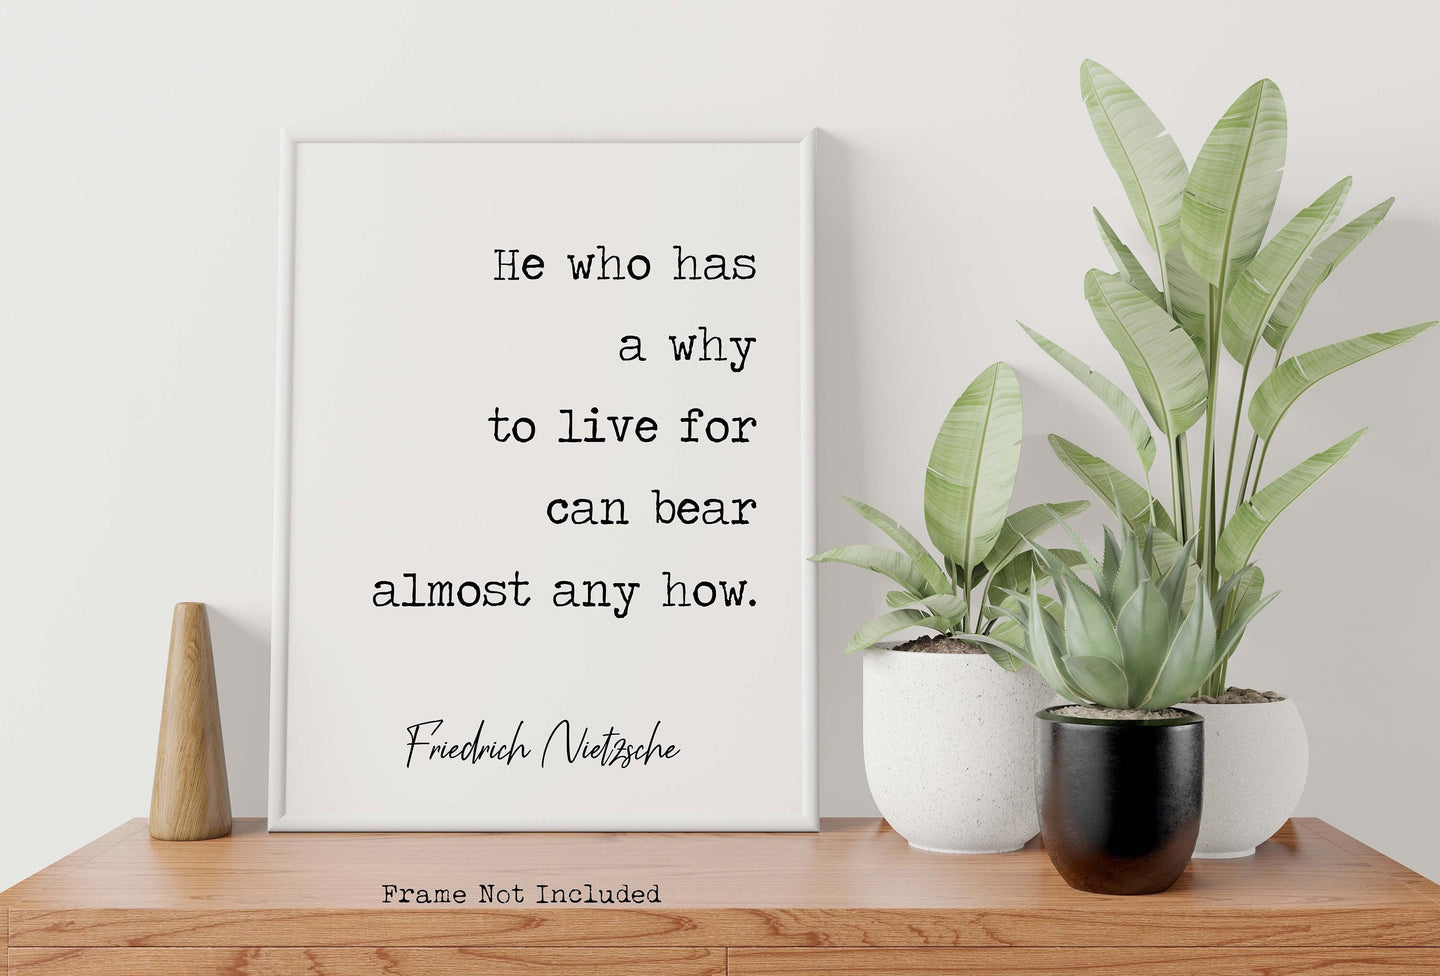 Nietzsche quote - He who has a why to live for can bear almost any how - philosophy print - office decor - unframed print UNFRAMED